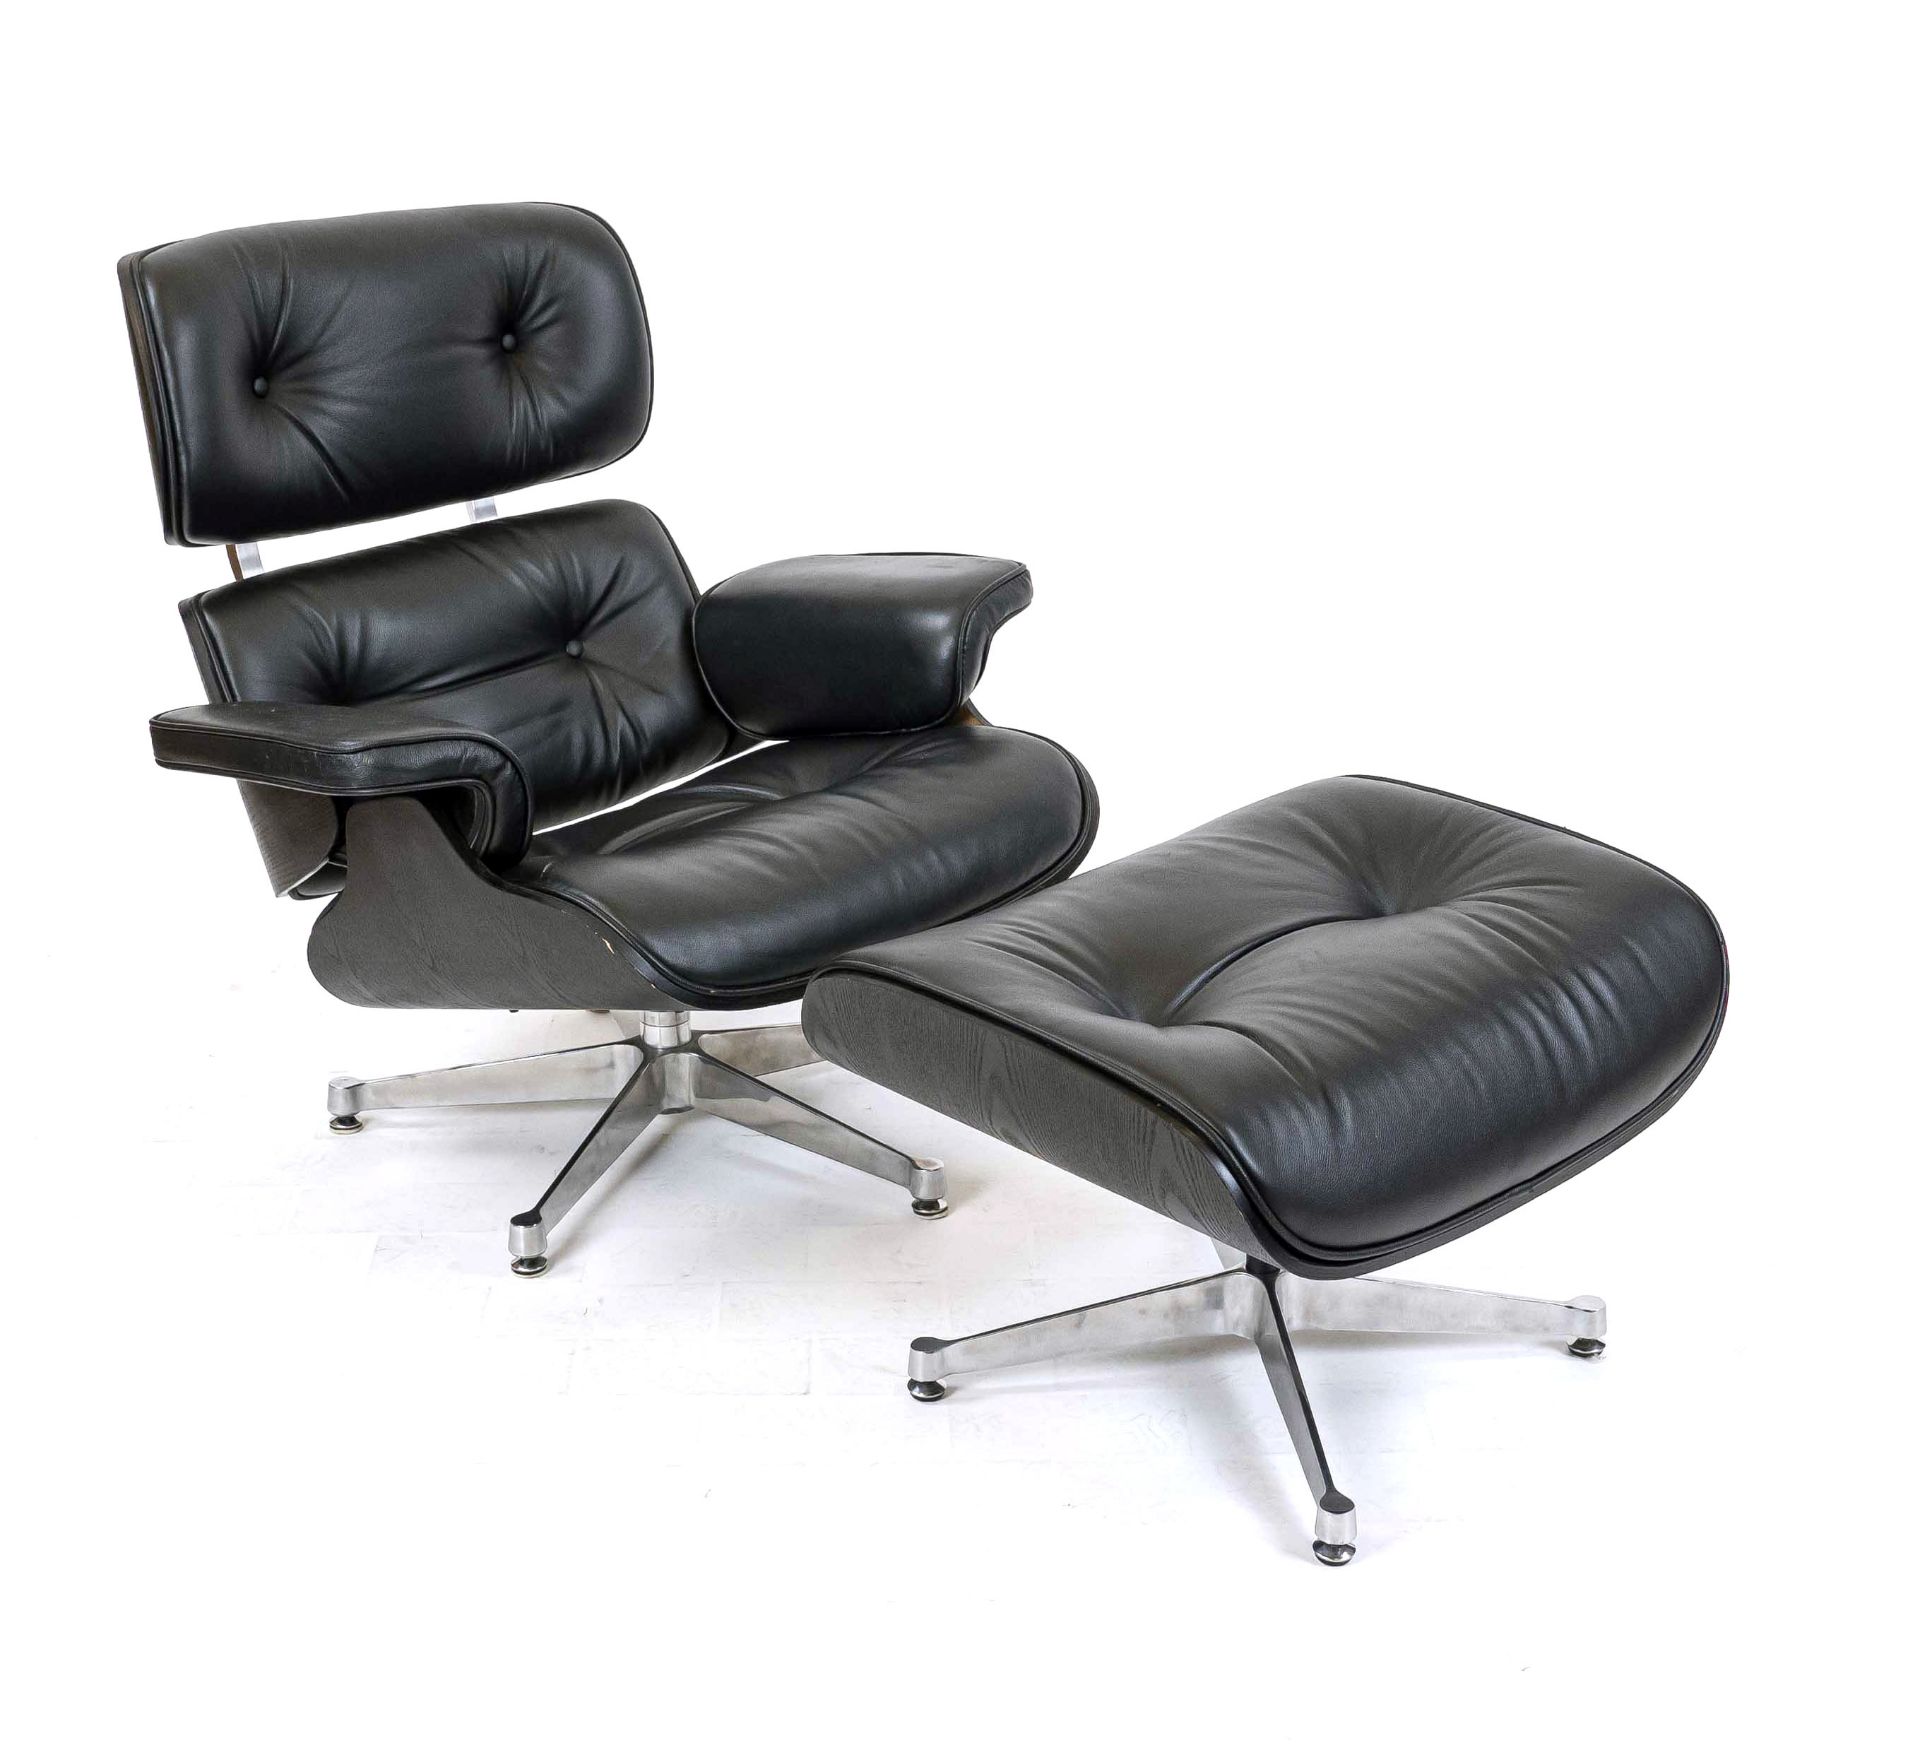 Armchair with stool, 20th century, in the style of Charles Eames, quilted black leather, 84 x 87 x